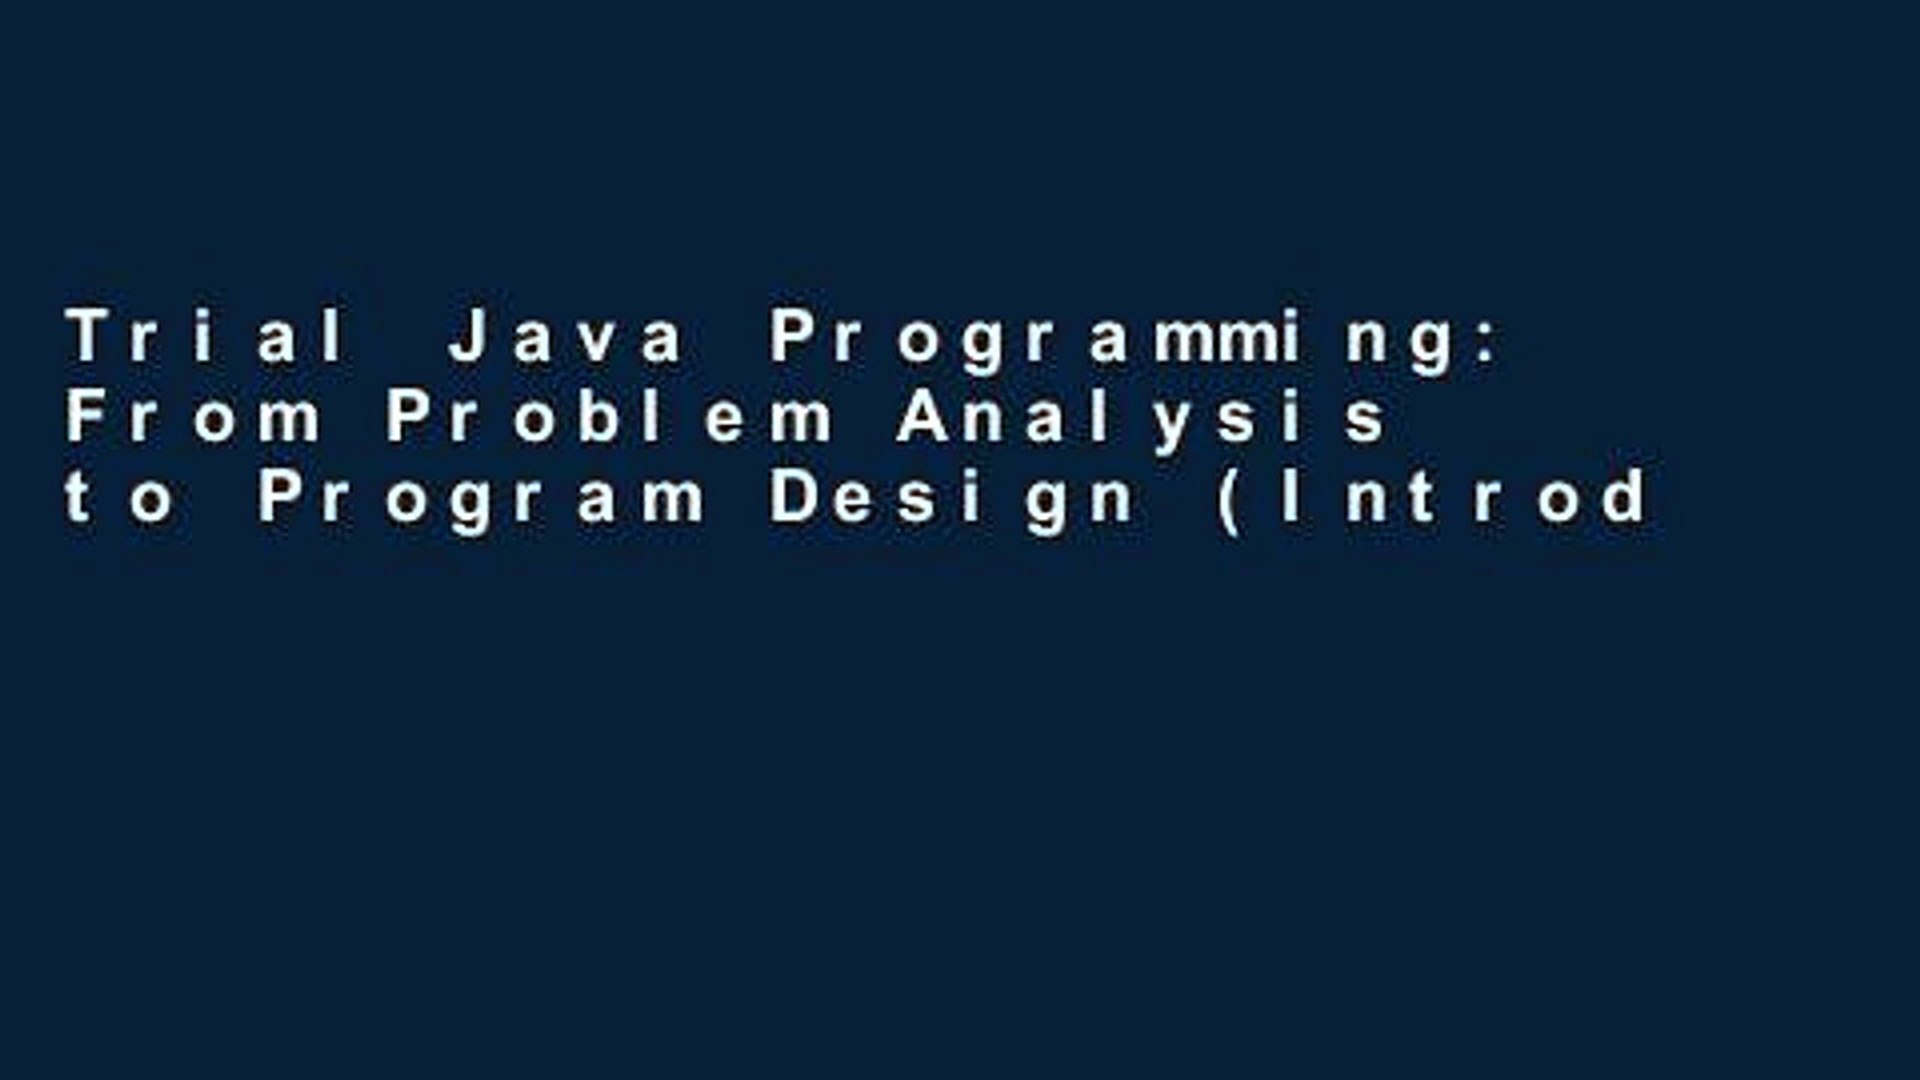 Trial Java Programming: From Problem Analysis to Program Design (Introduction to Programming) Ebook